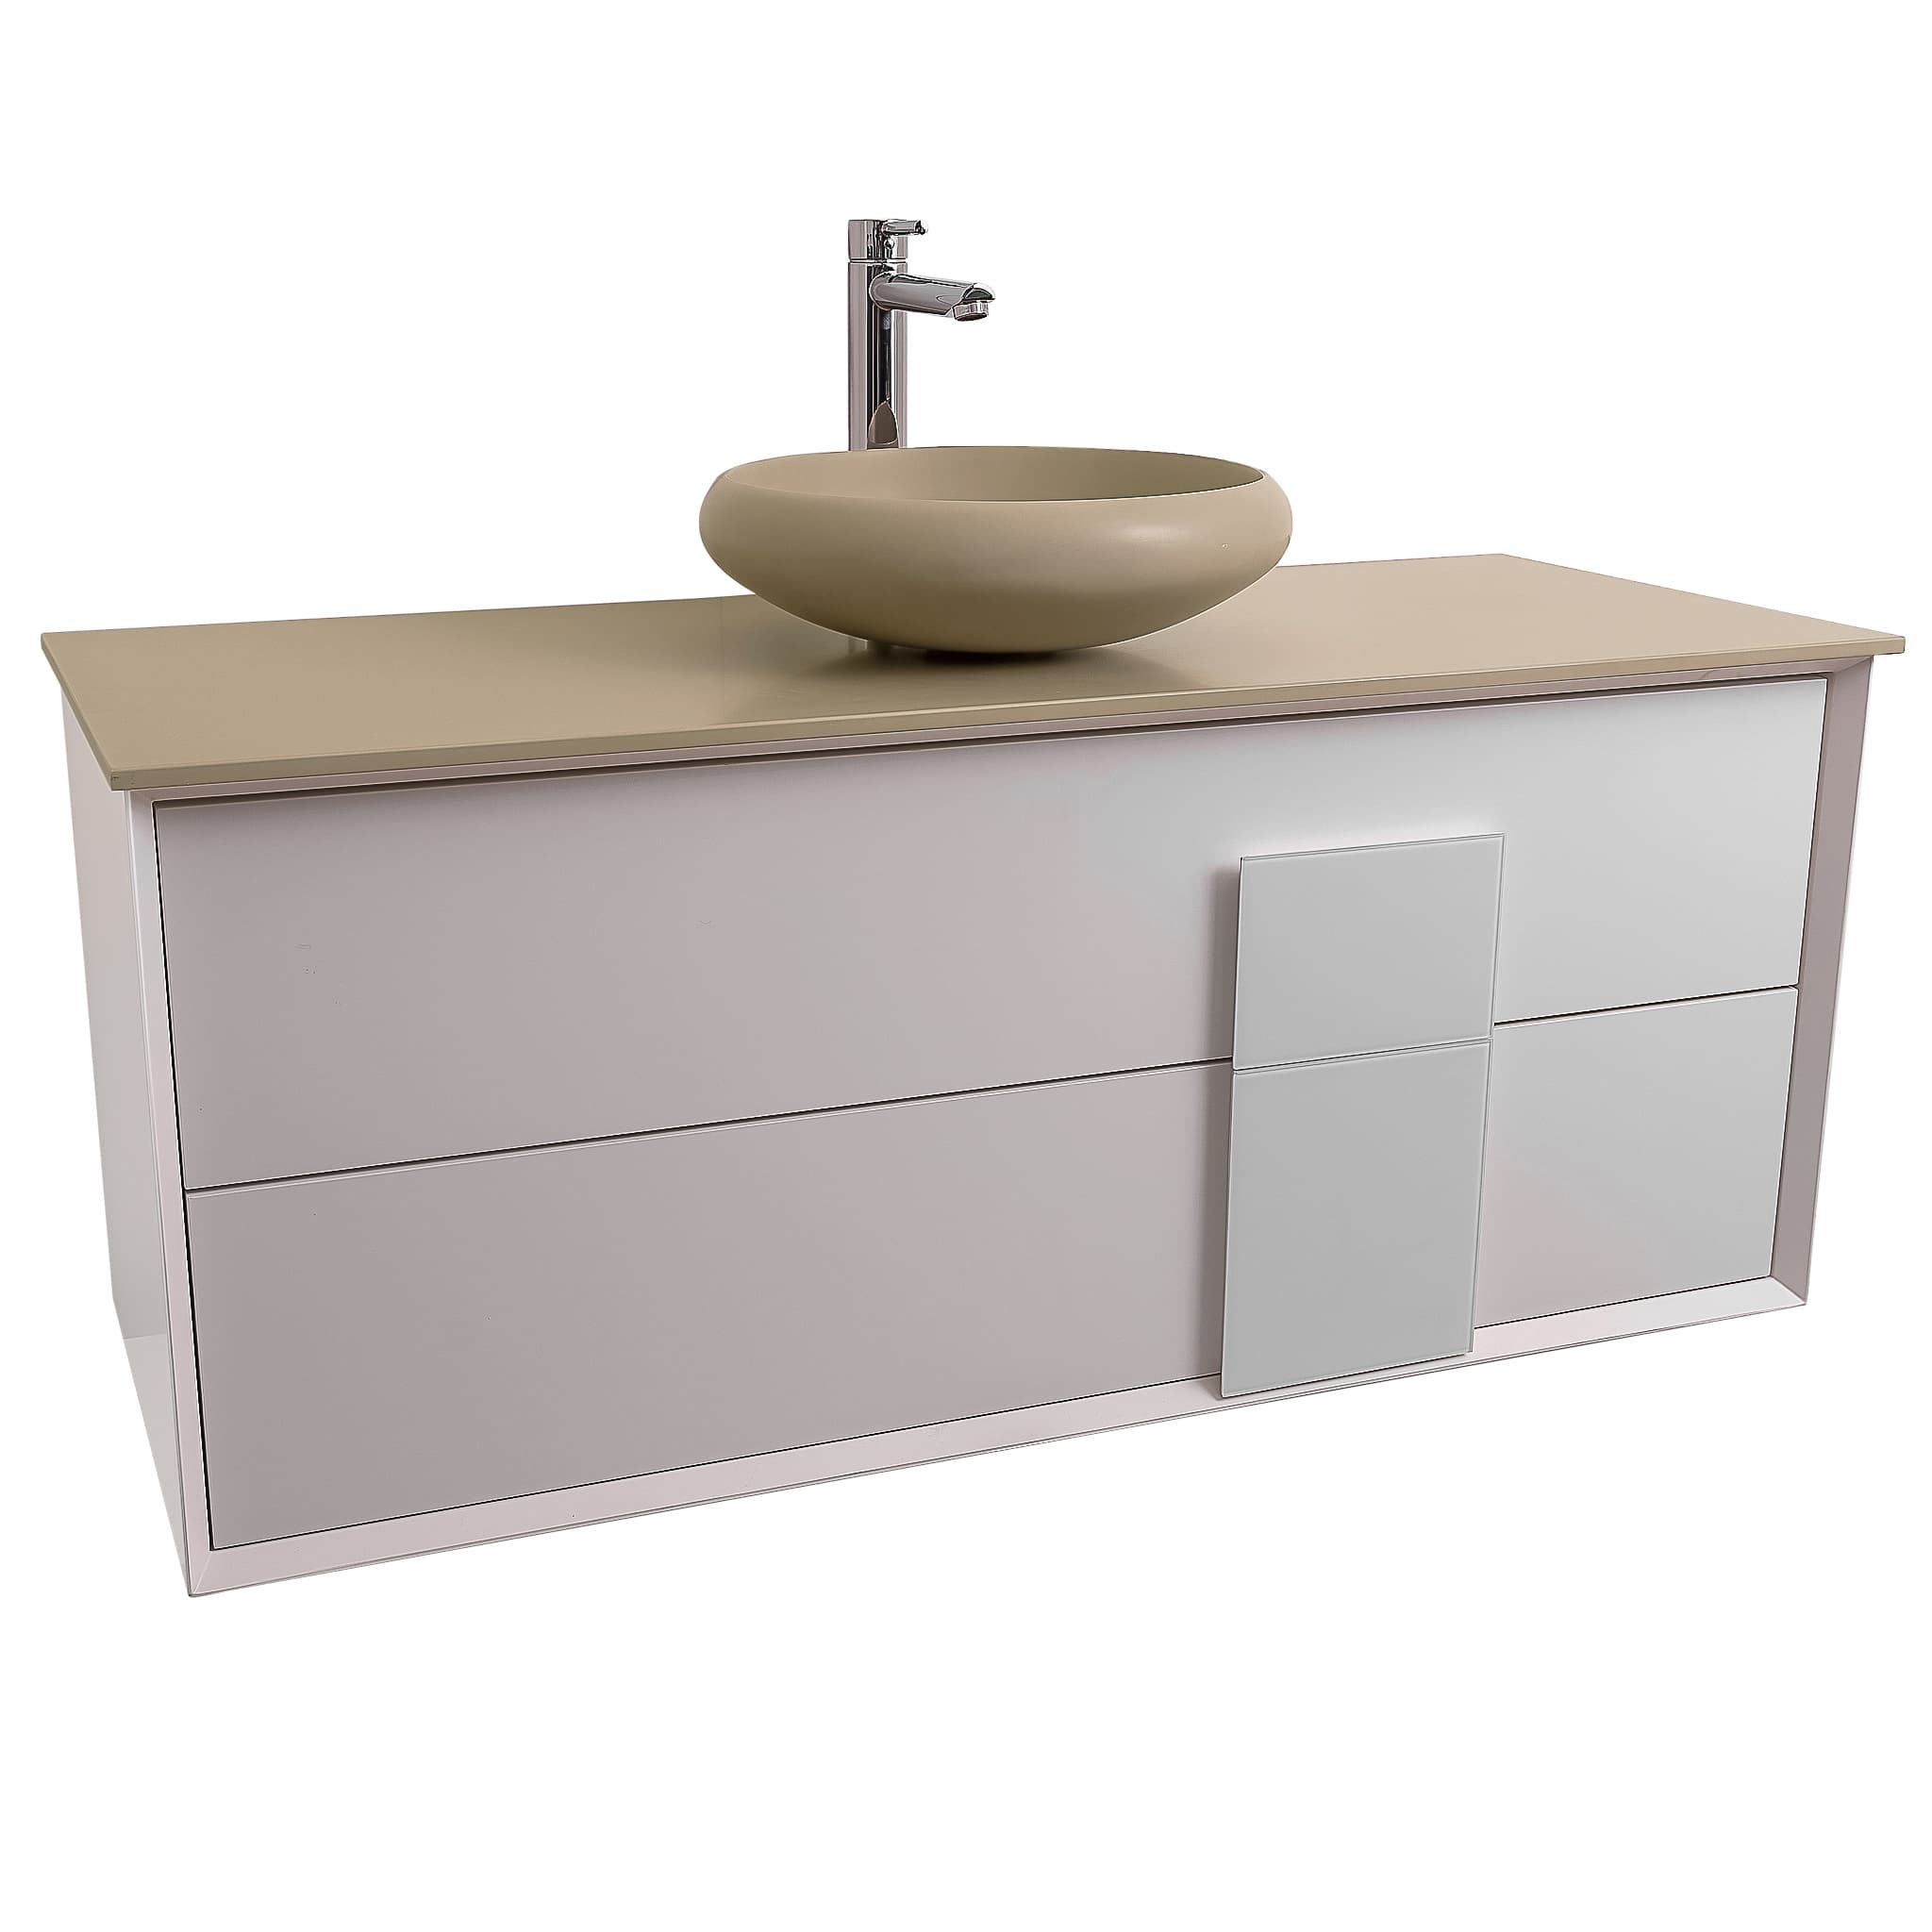 Piazza 47.5 Matte White With White Handle Cabinet, Solid Surface Flat Taupe Counter and Round Solid Surface Taupe Basin 1153, Wall Mounted Modern Vanity Set